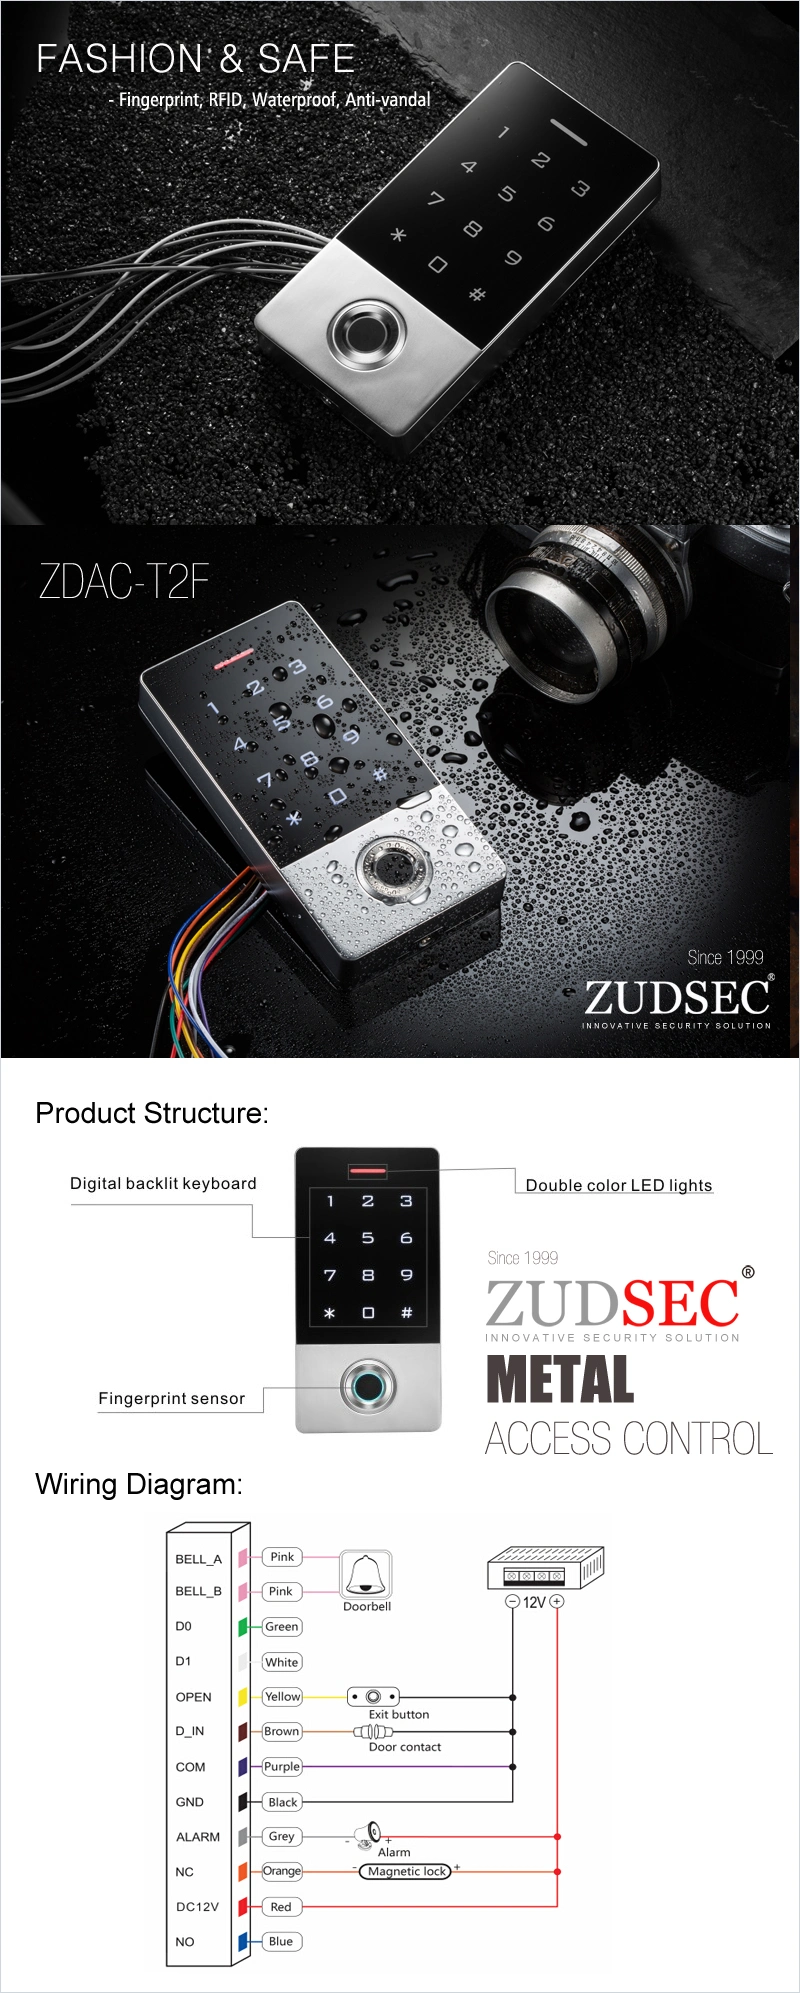 Biometric Fingerprint Smart Card RFID Card Keypad Access Control and Time Attendance System